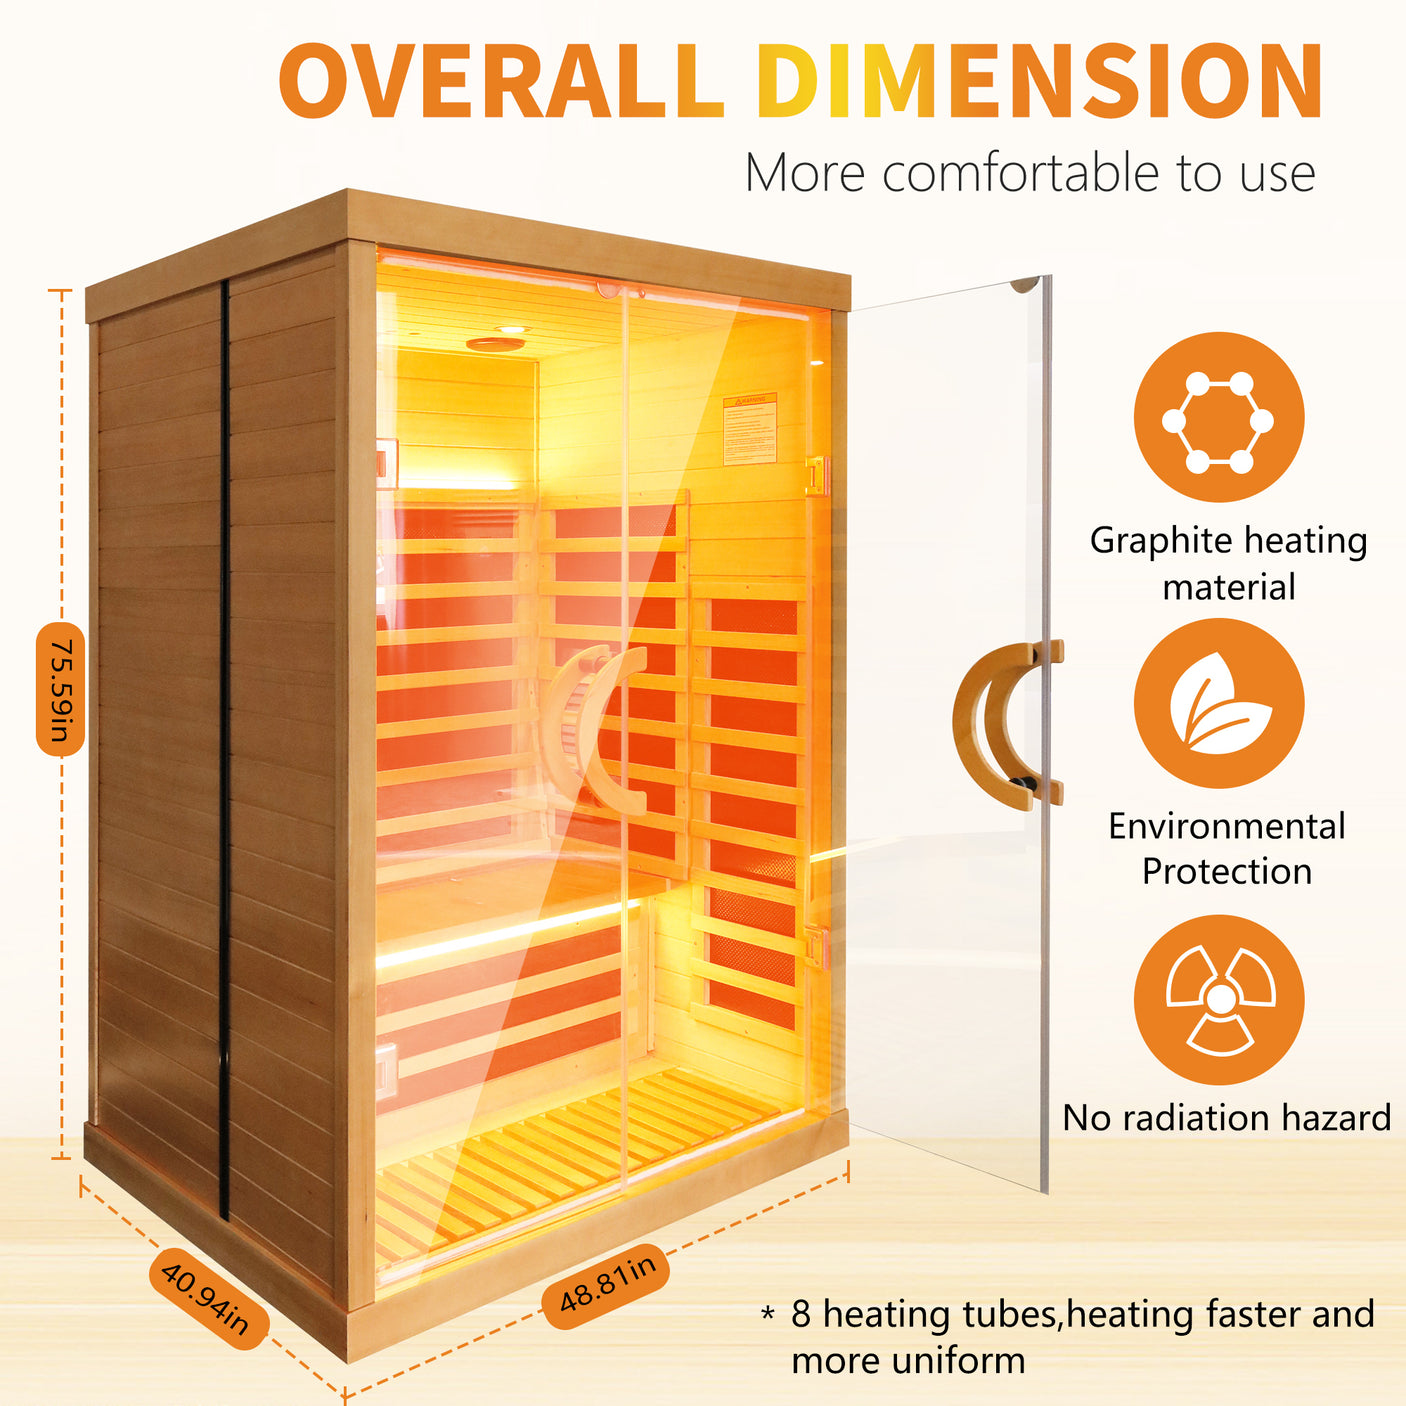 Far-infrared sauna room double glass family model with bluetooth audio app control